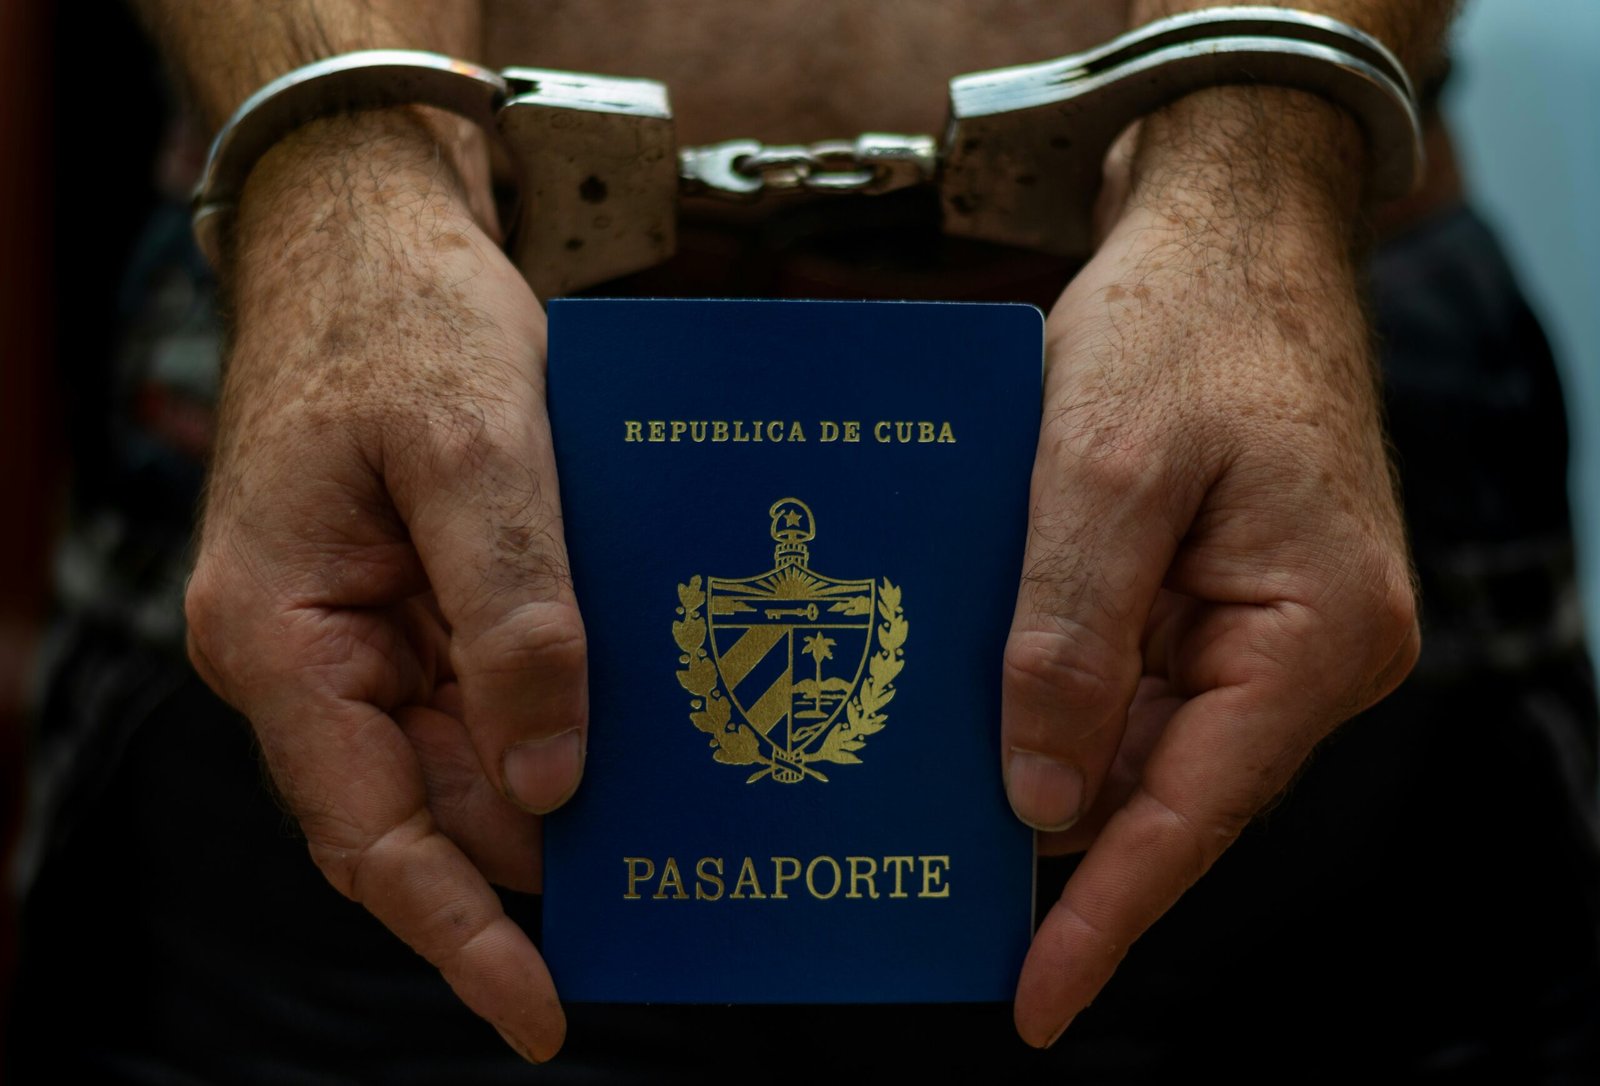 a person holding a passport in their hands